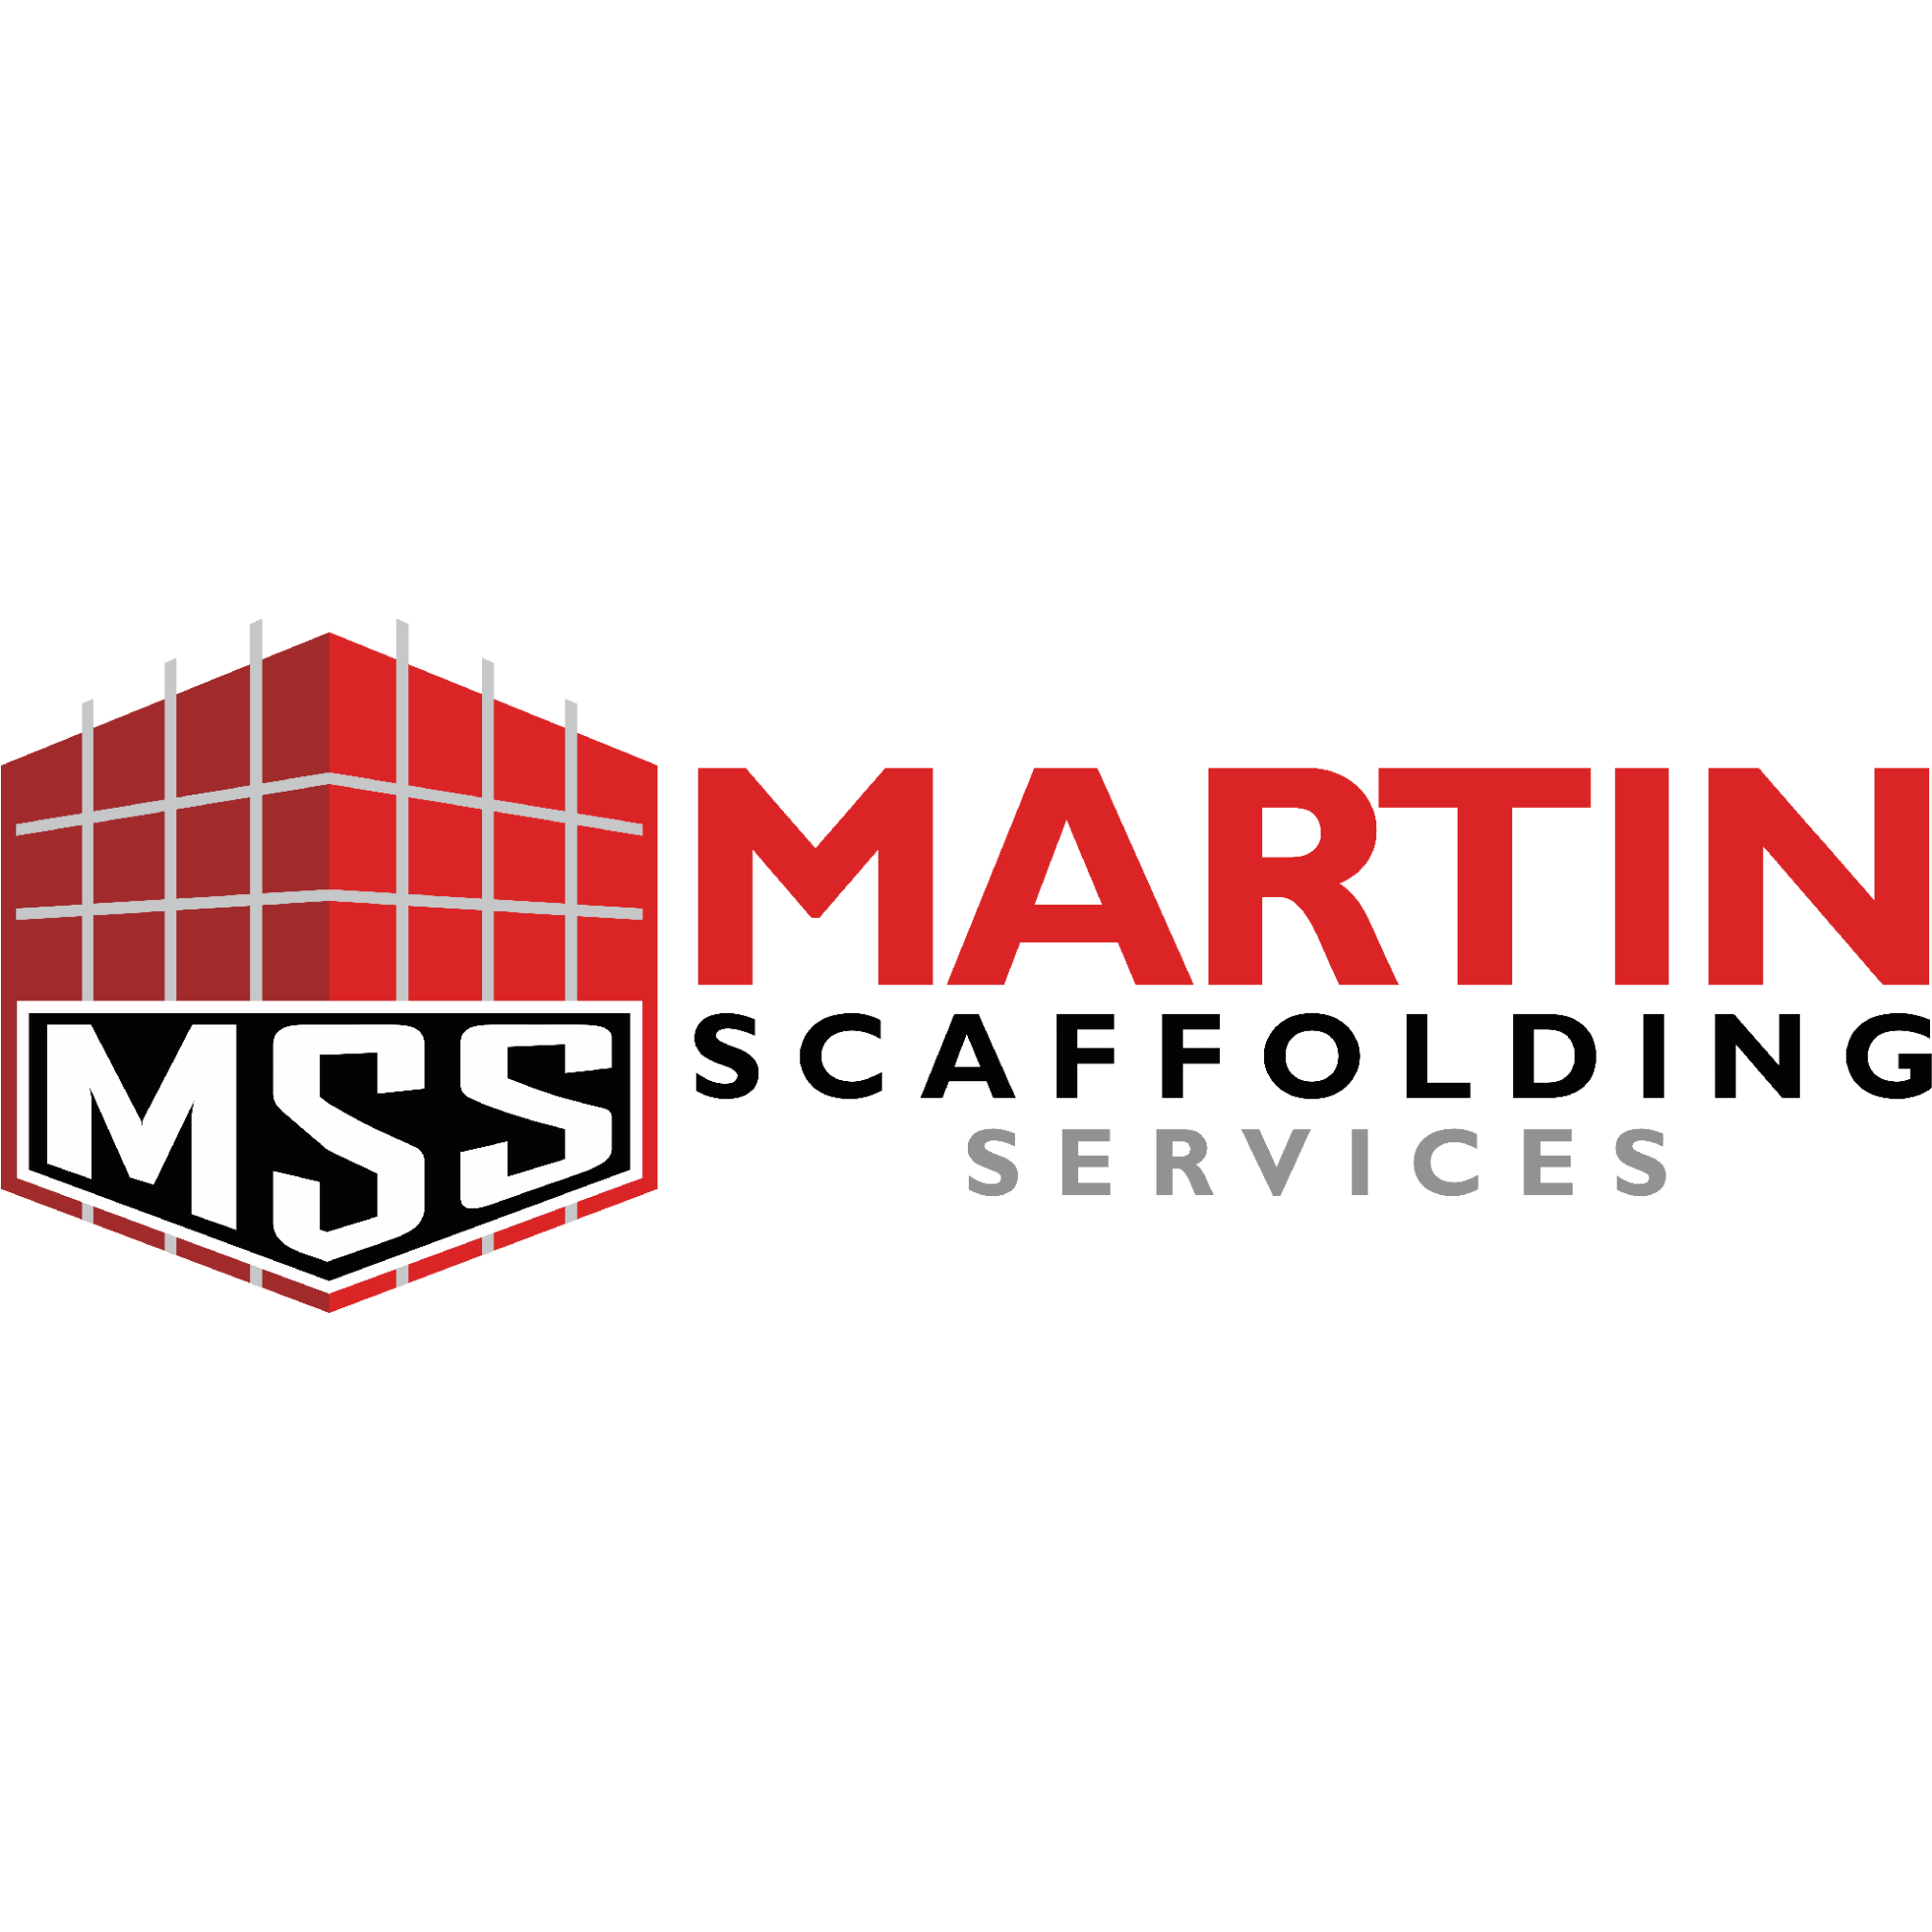 Martin Scaffolding & Netting Services - Oswestry, Shropshire SY11 2EY - 07960 222947 | ShowMeLocal.com